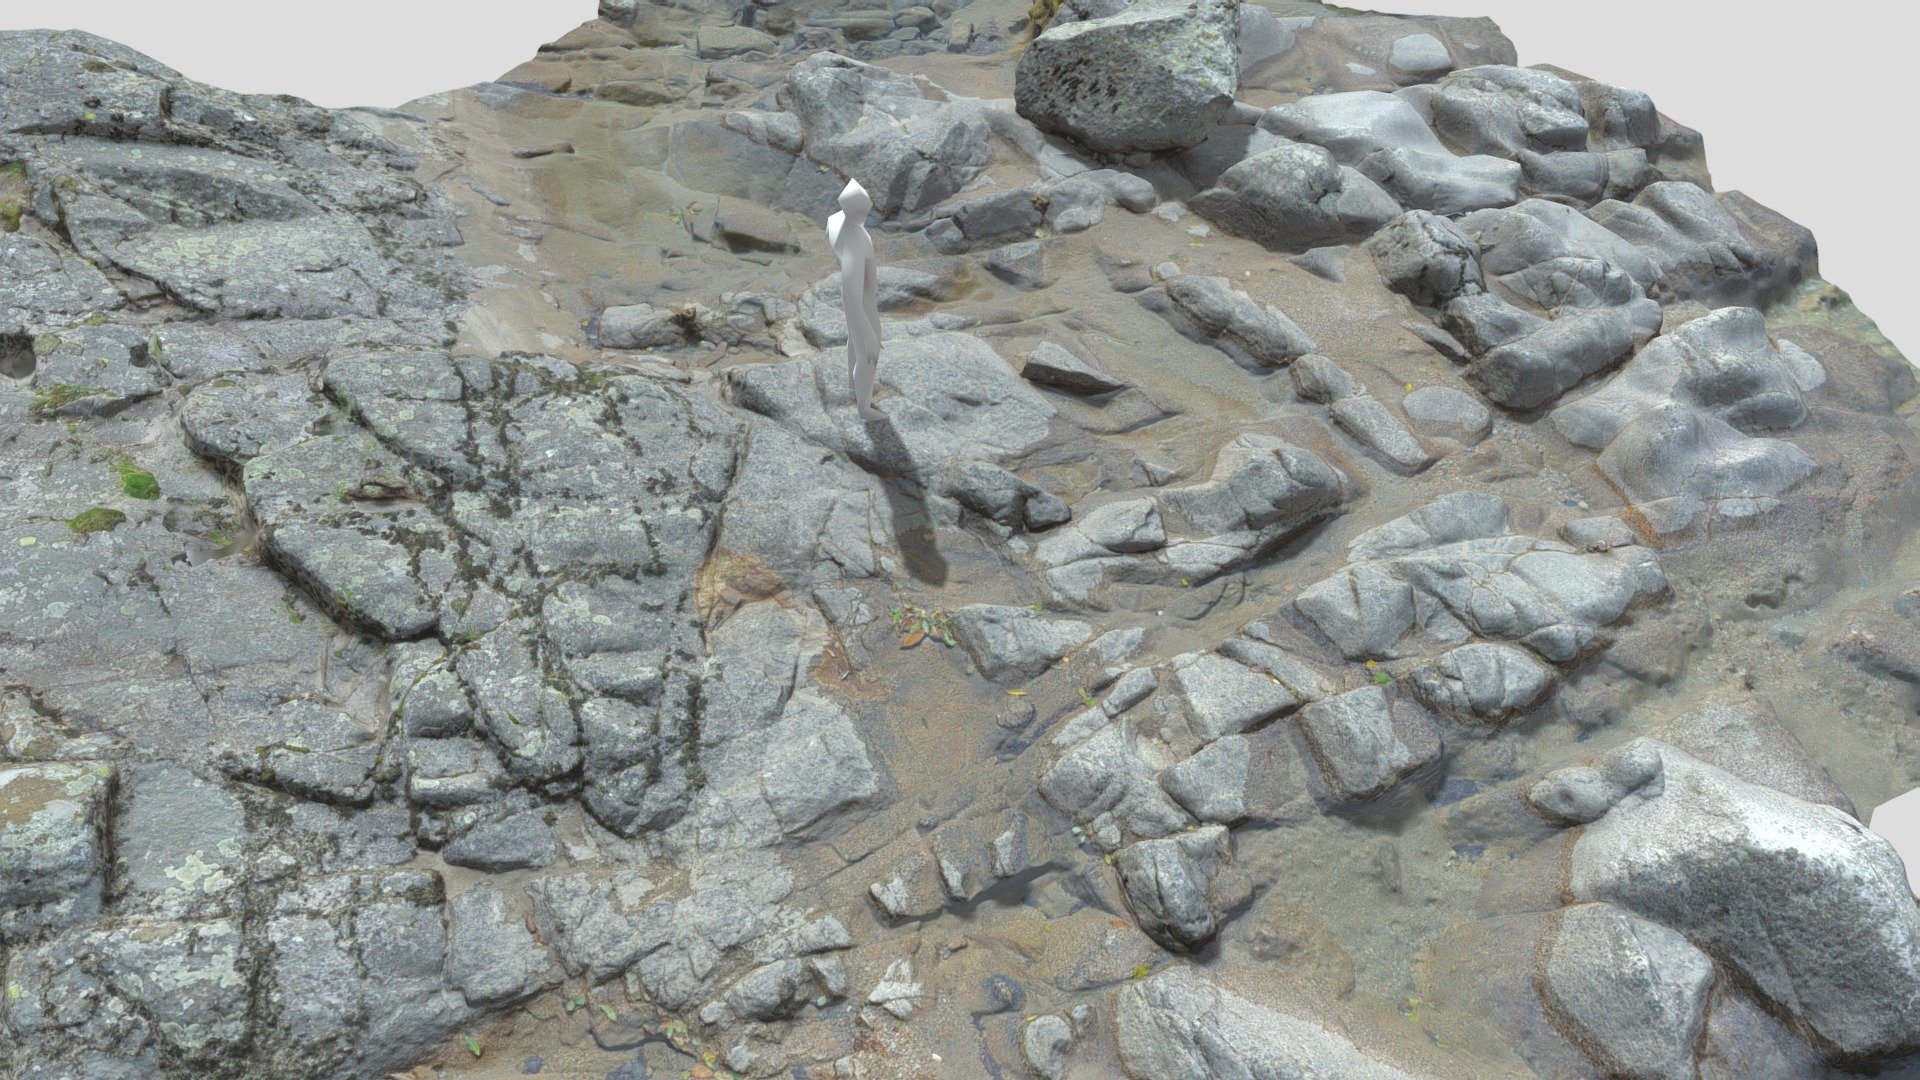 Fully processed 3D scans: no light information, color-matched, etc.

Ready to use for all kind of CGI

Additional file's Contains:




highpoly + texture

8K Textures:





normal map




albedo




roughness



Please let me know if something isn't working as it should.

Realistic River Cliff Rocks Scan - River Cliff Rocks Scan - Buy Royalty Free 3D model by Per's Scan Collection (@perz_scans) 3d model